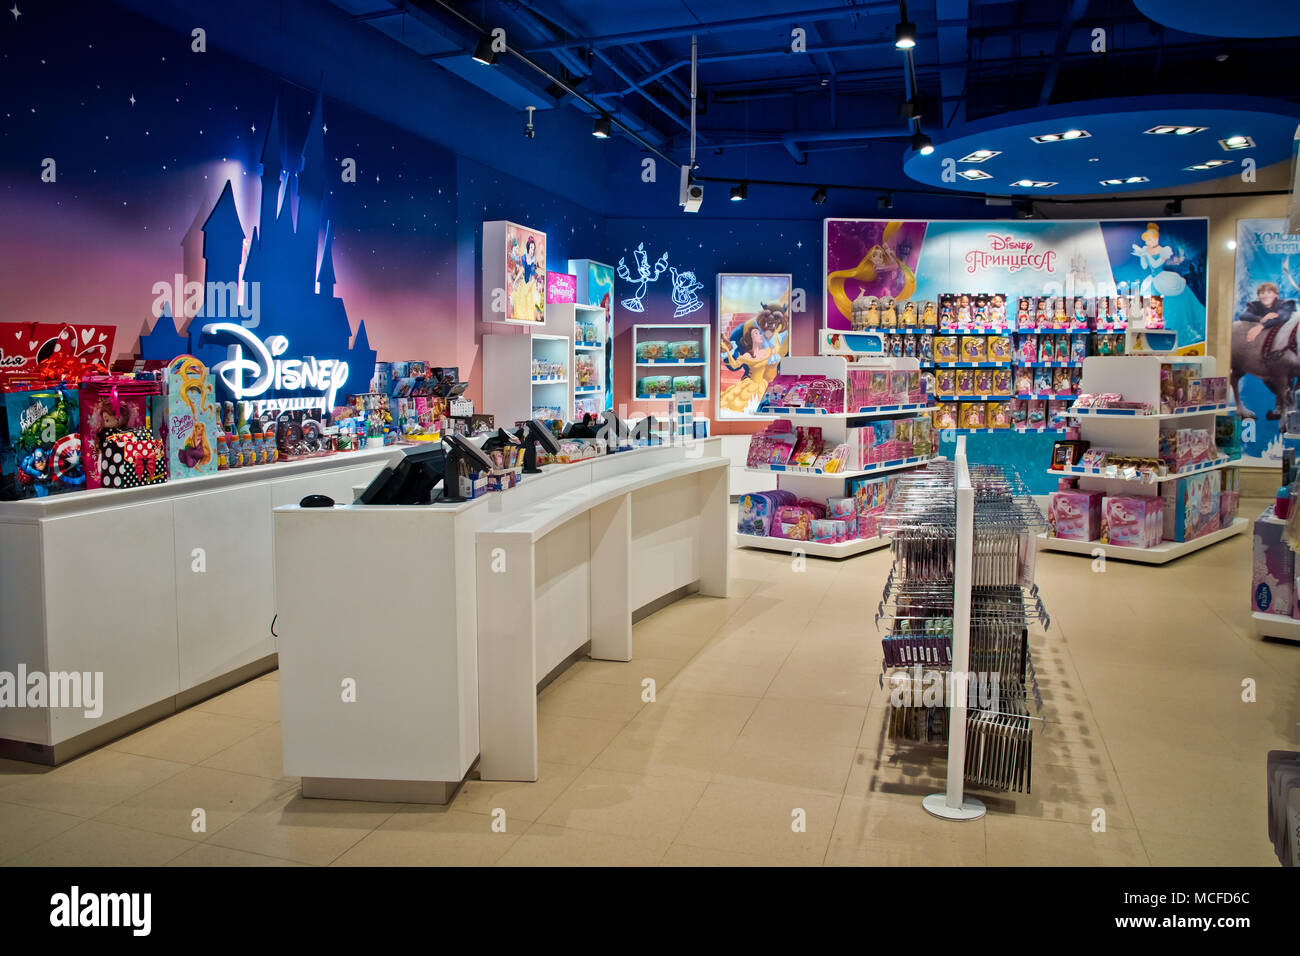 Disney store interor. The Walt Disney Company, commonly known as Disney, is an American mass media and entertainment company Stock Photo